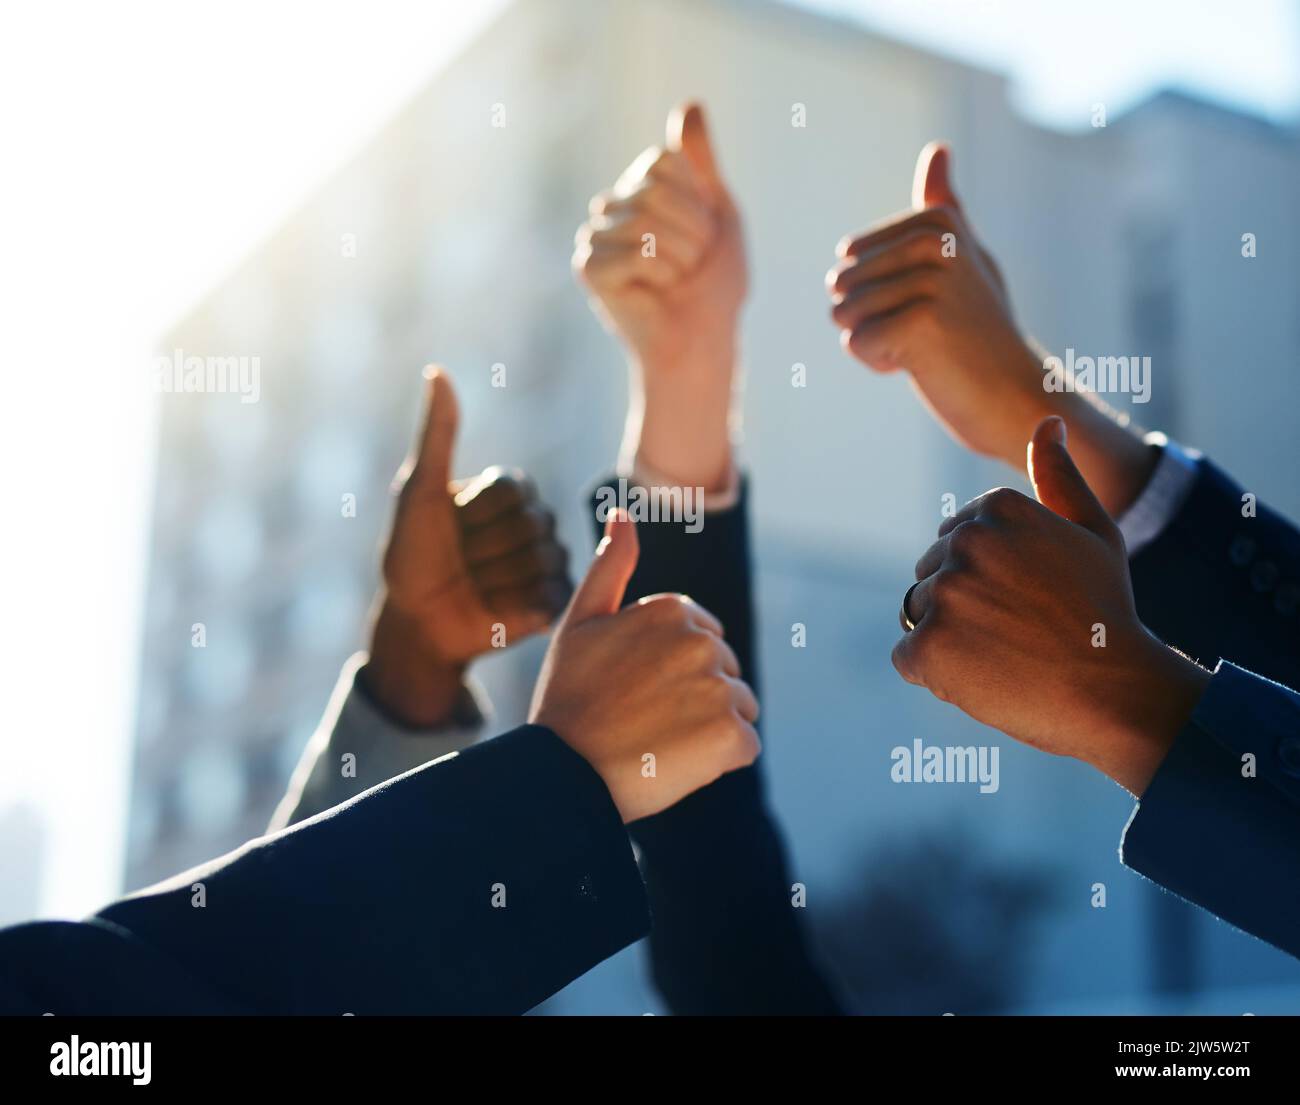 That was amazing. a group of office workers giving thumbs up together. Stock Photo